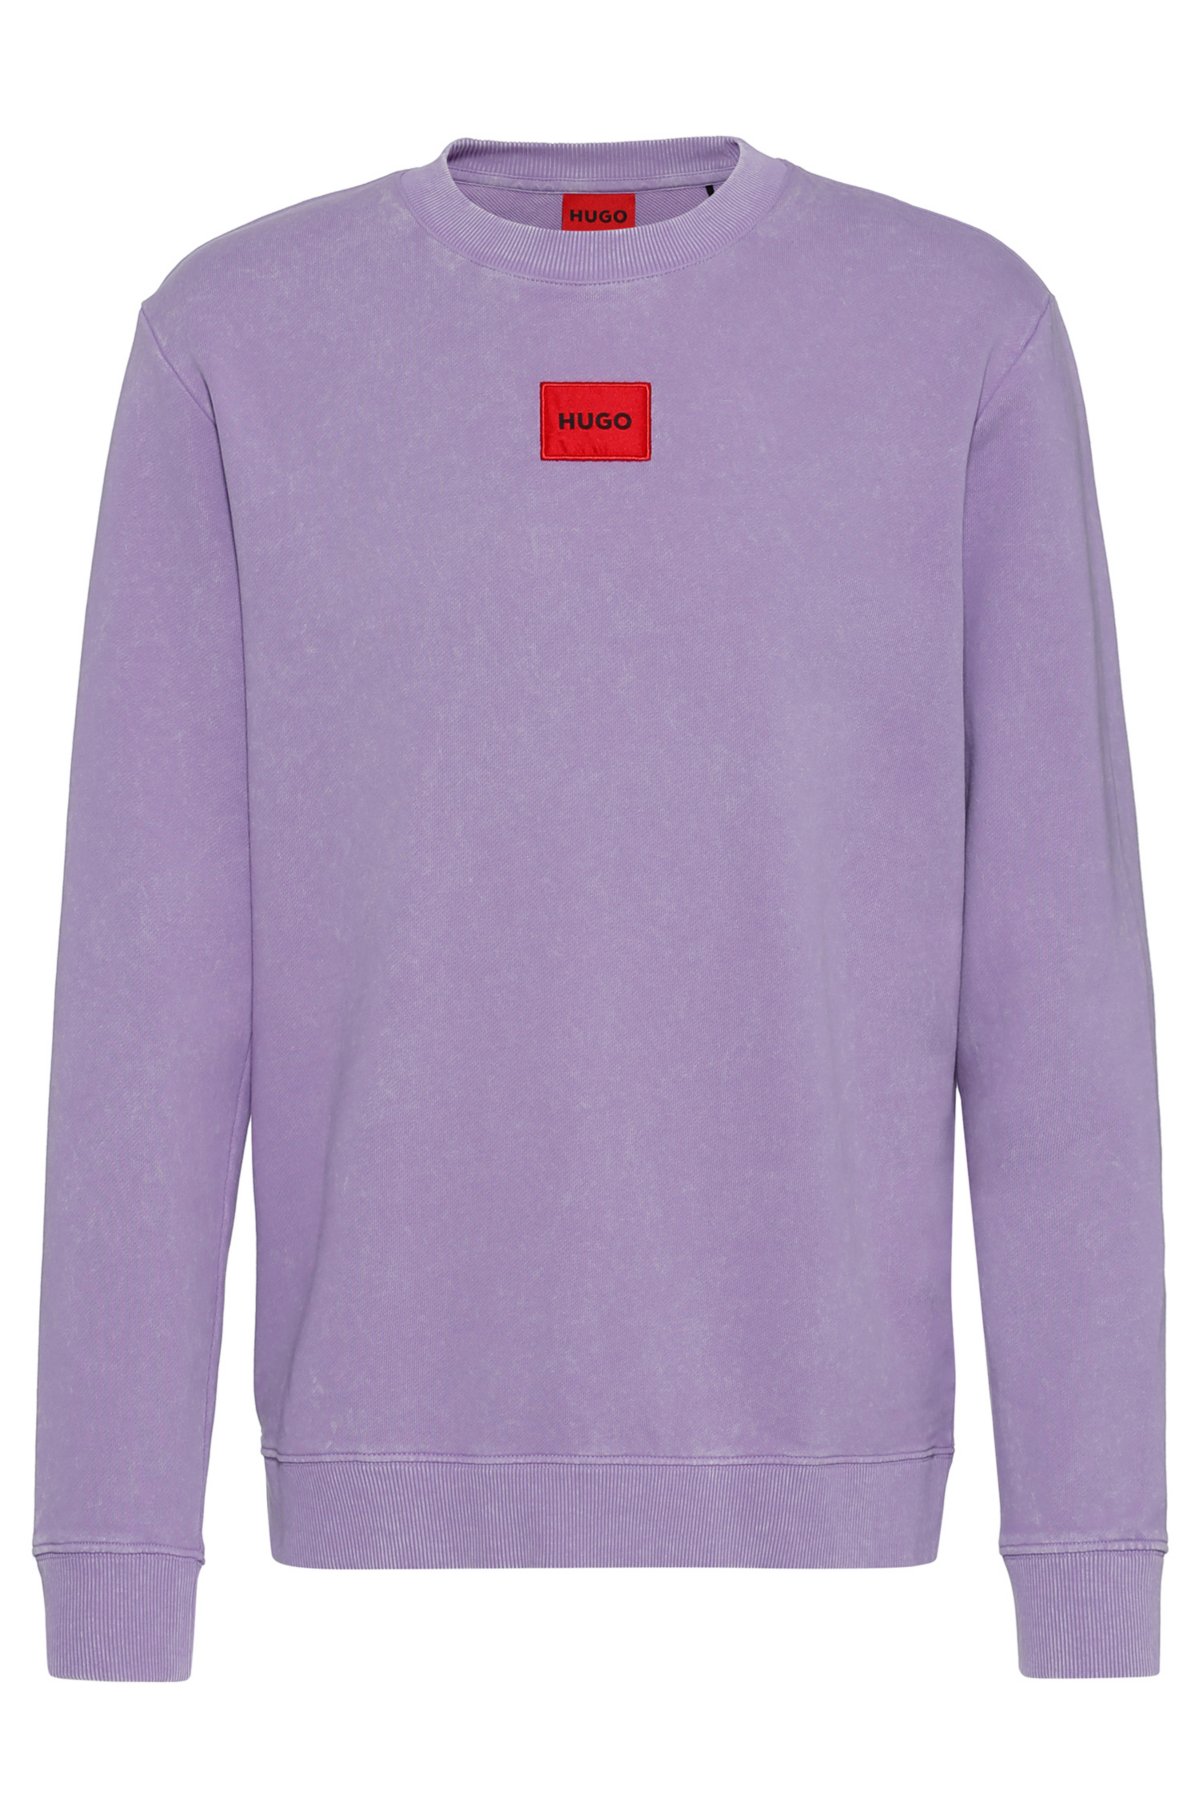 HUGO - Relaxed-fit sweatshirt in powder-dyed French terry cotton